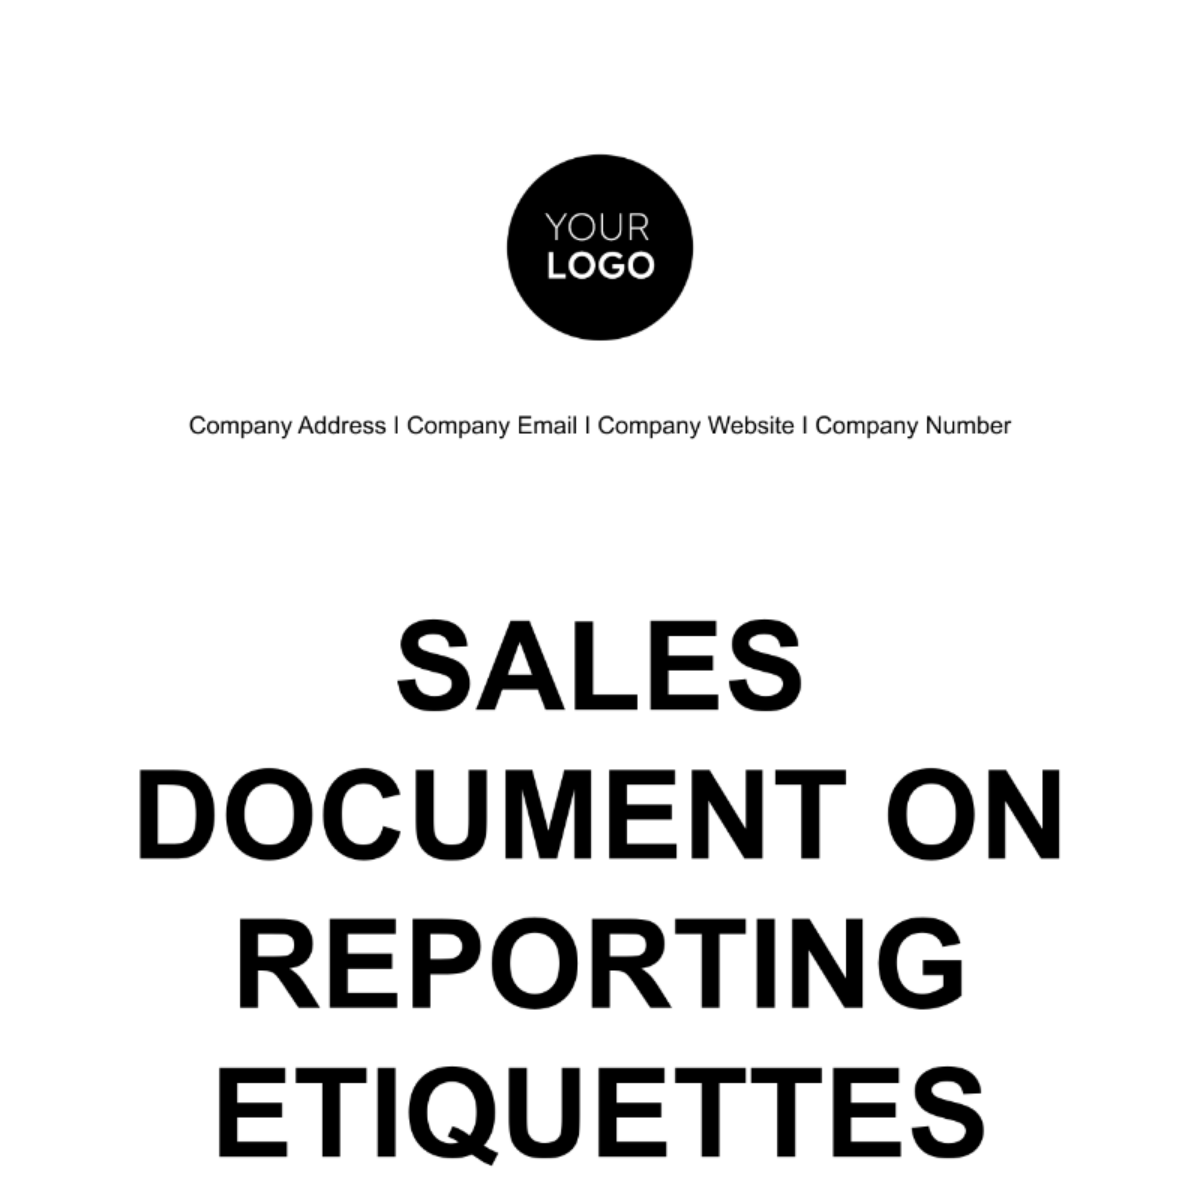 Sales Document on Reporting Etiquettes Template